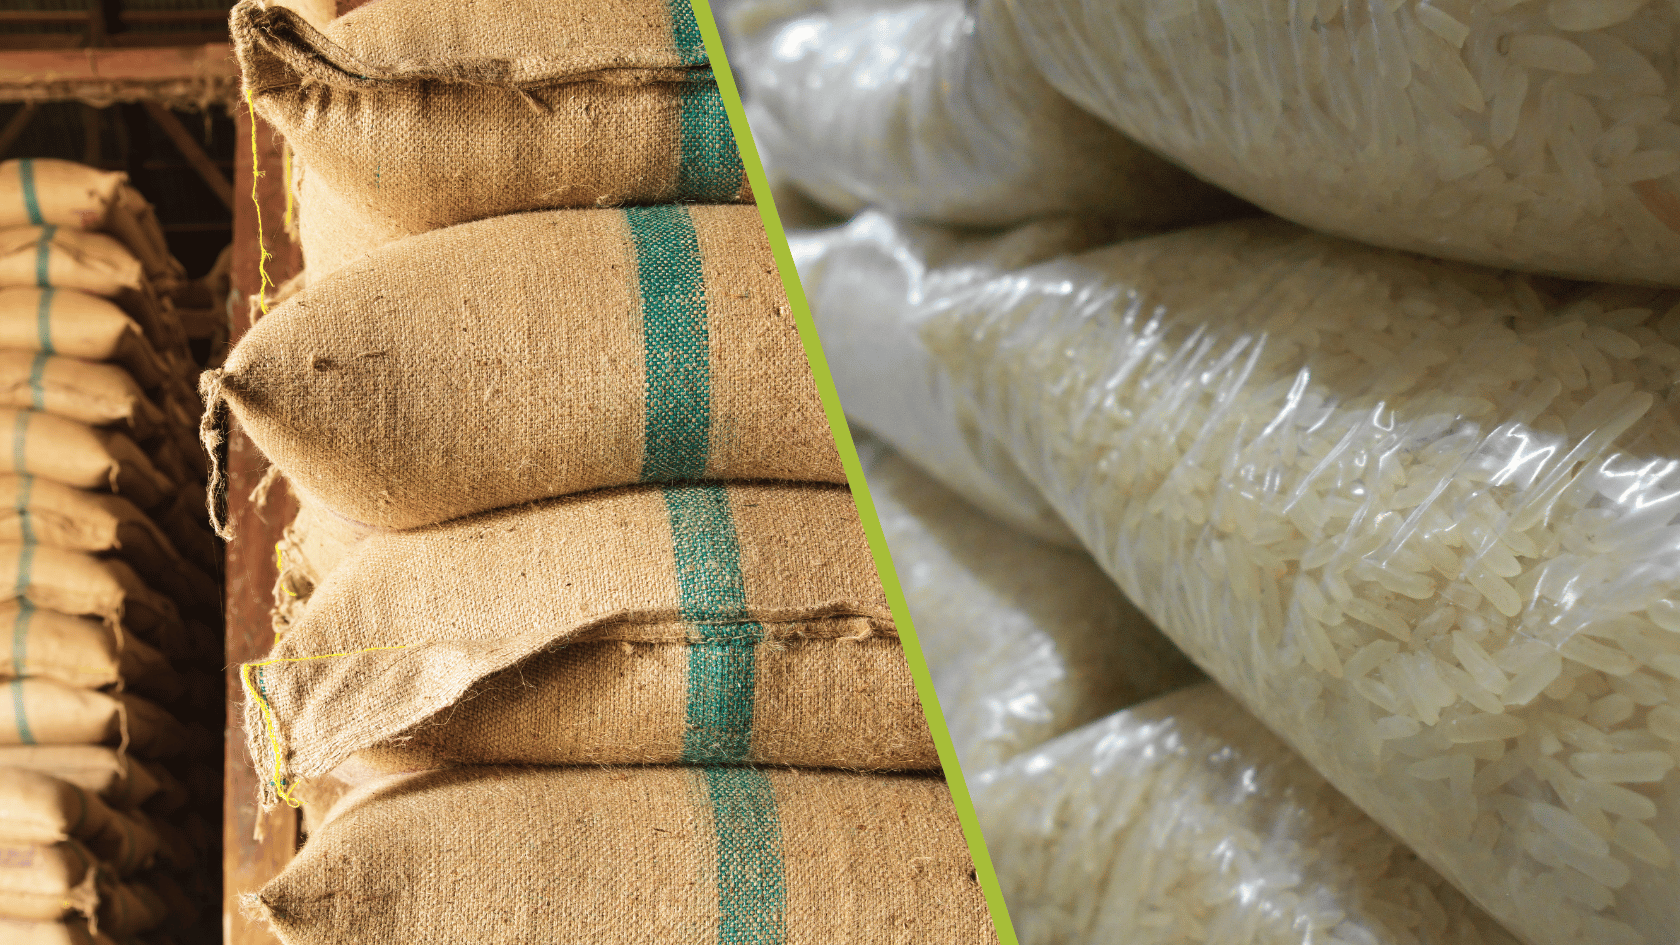 A split image shows filled hessian sacks on one side, and filled plastic rice bags on the other side